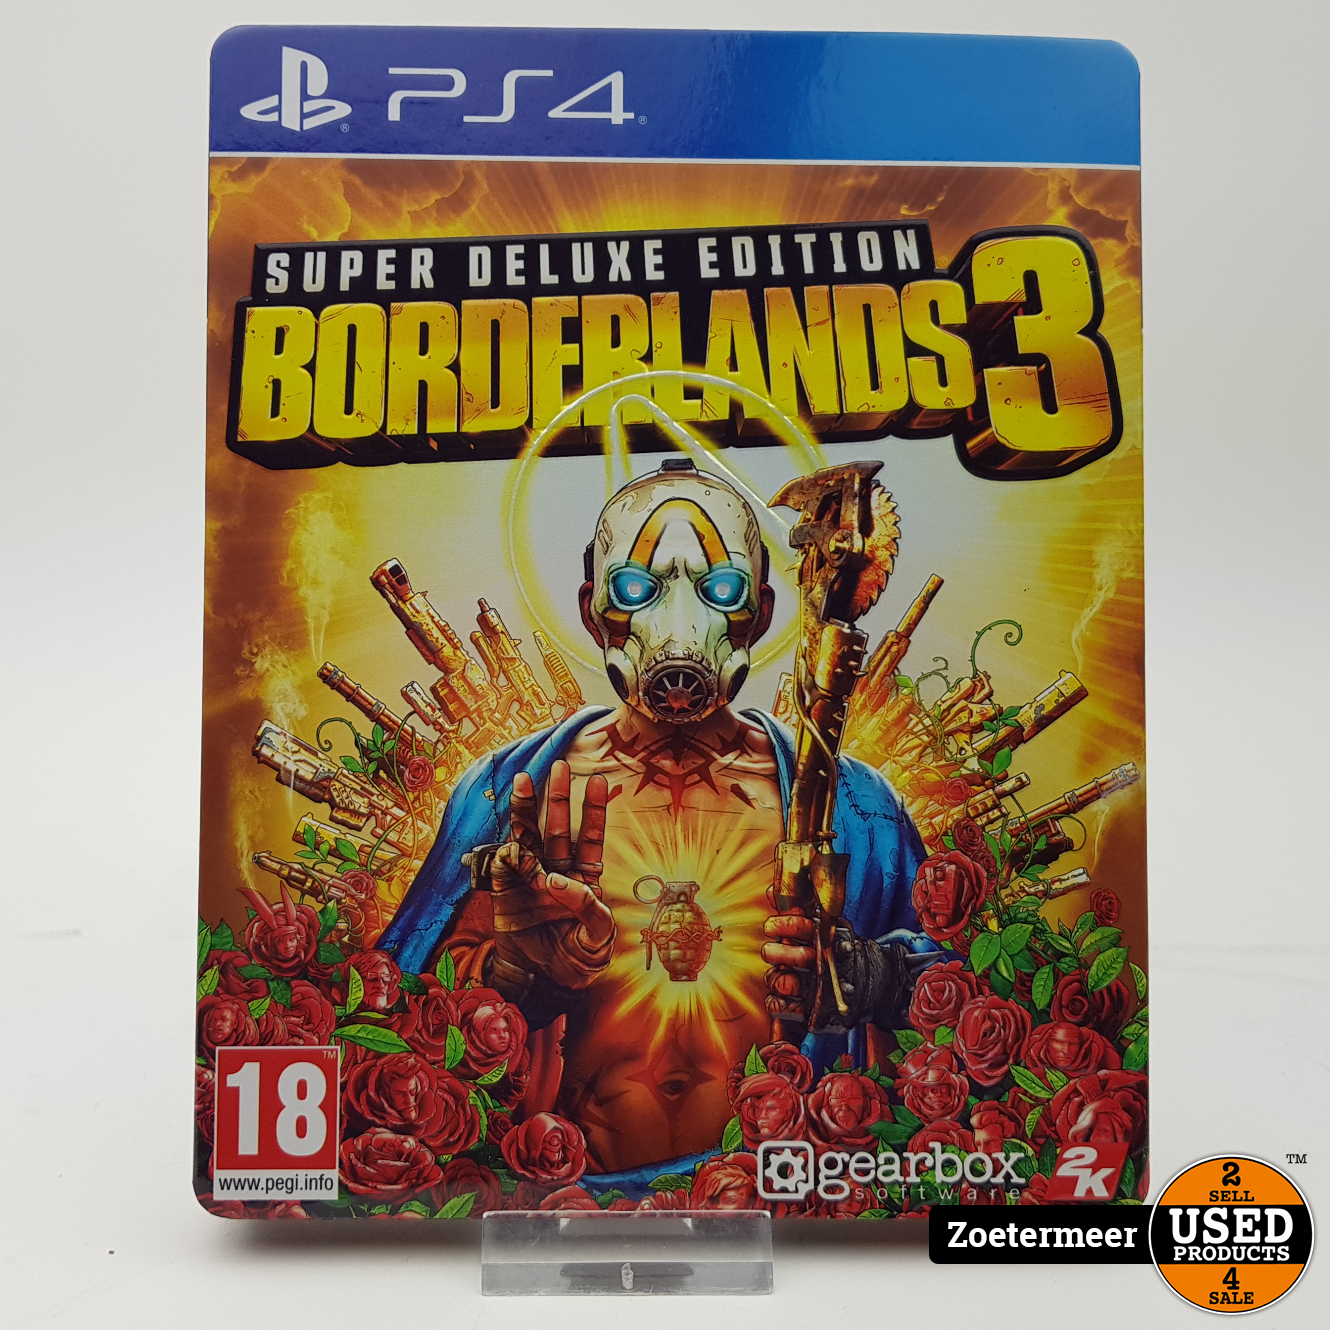 Borderlands 3 Super Deluxe Edition Ps4 Used Products Zoetermeer